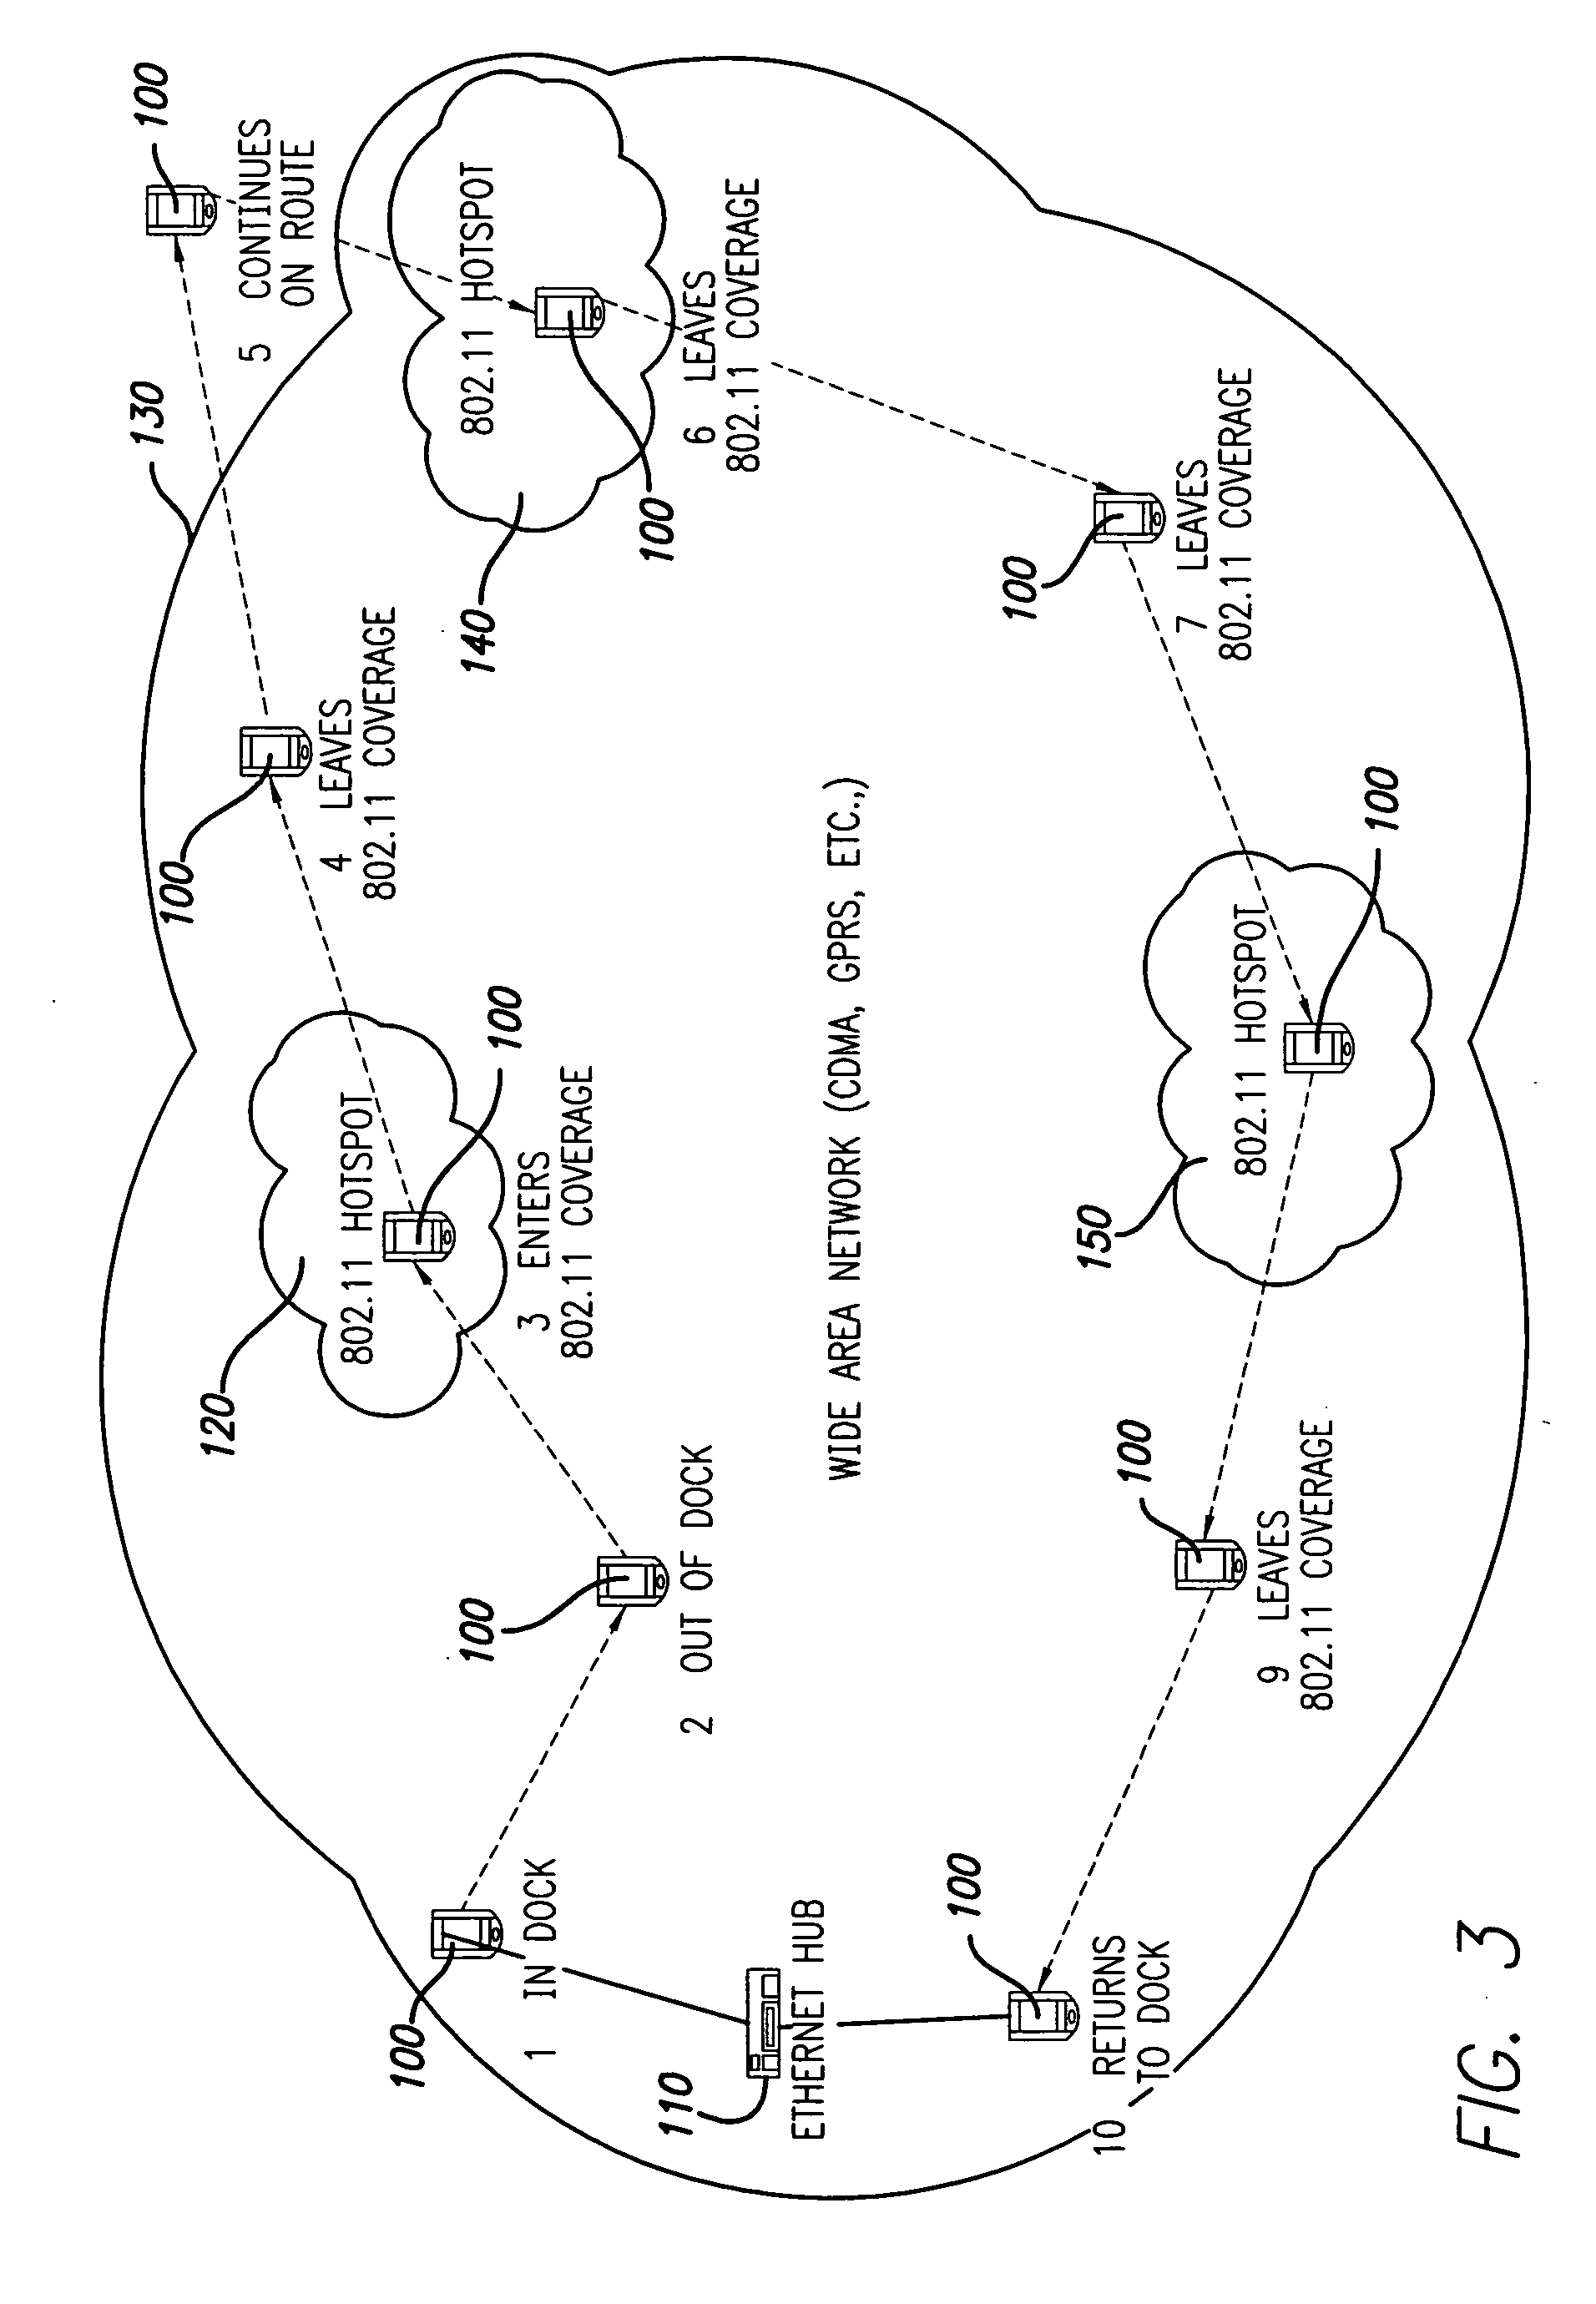 System and method for providing seamless roaming